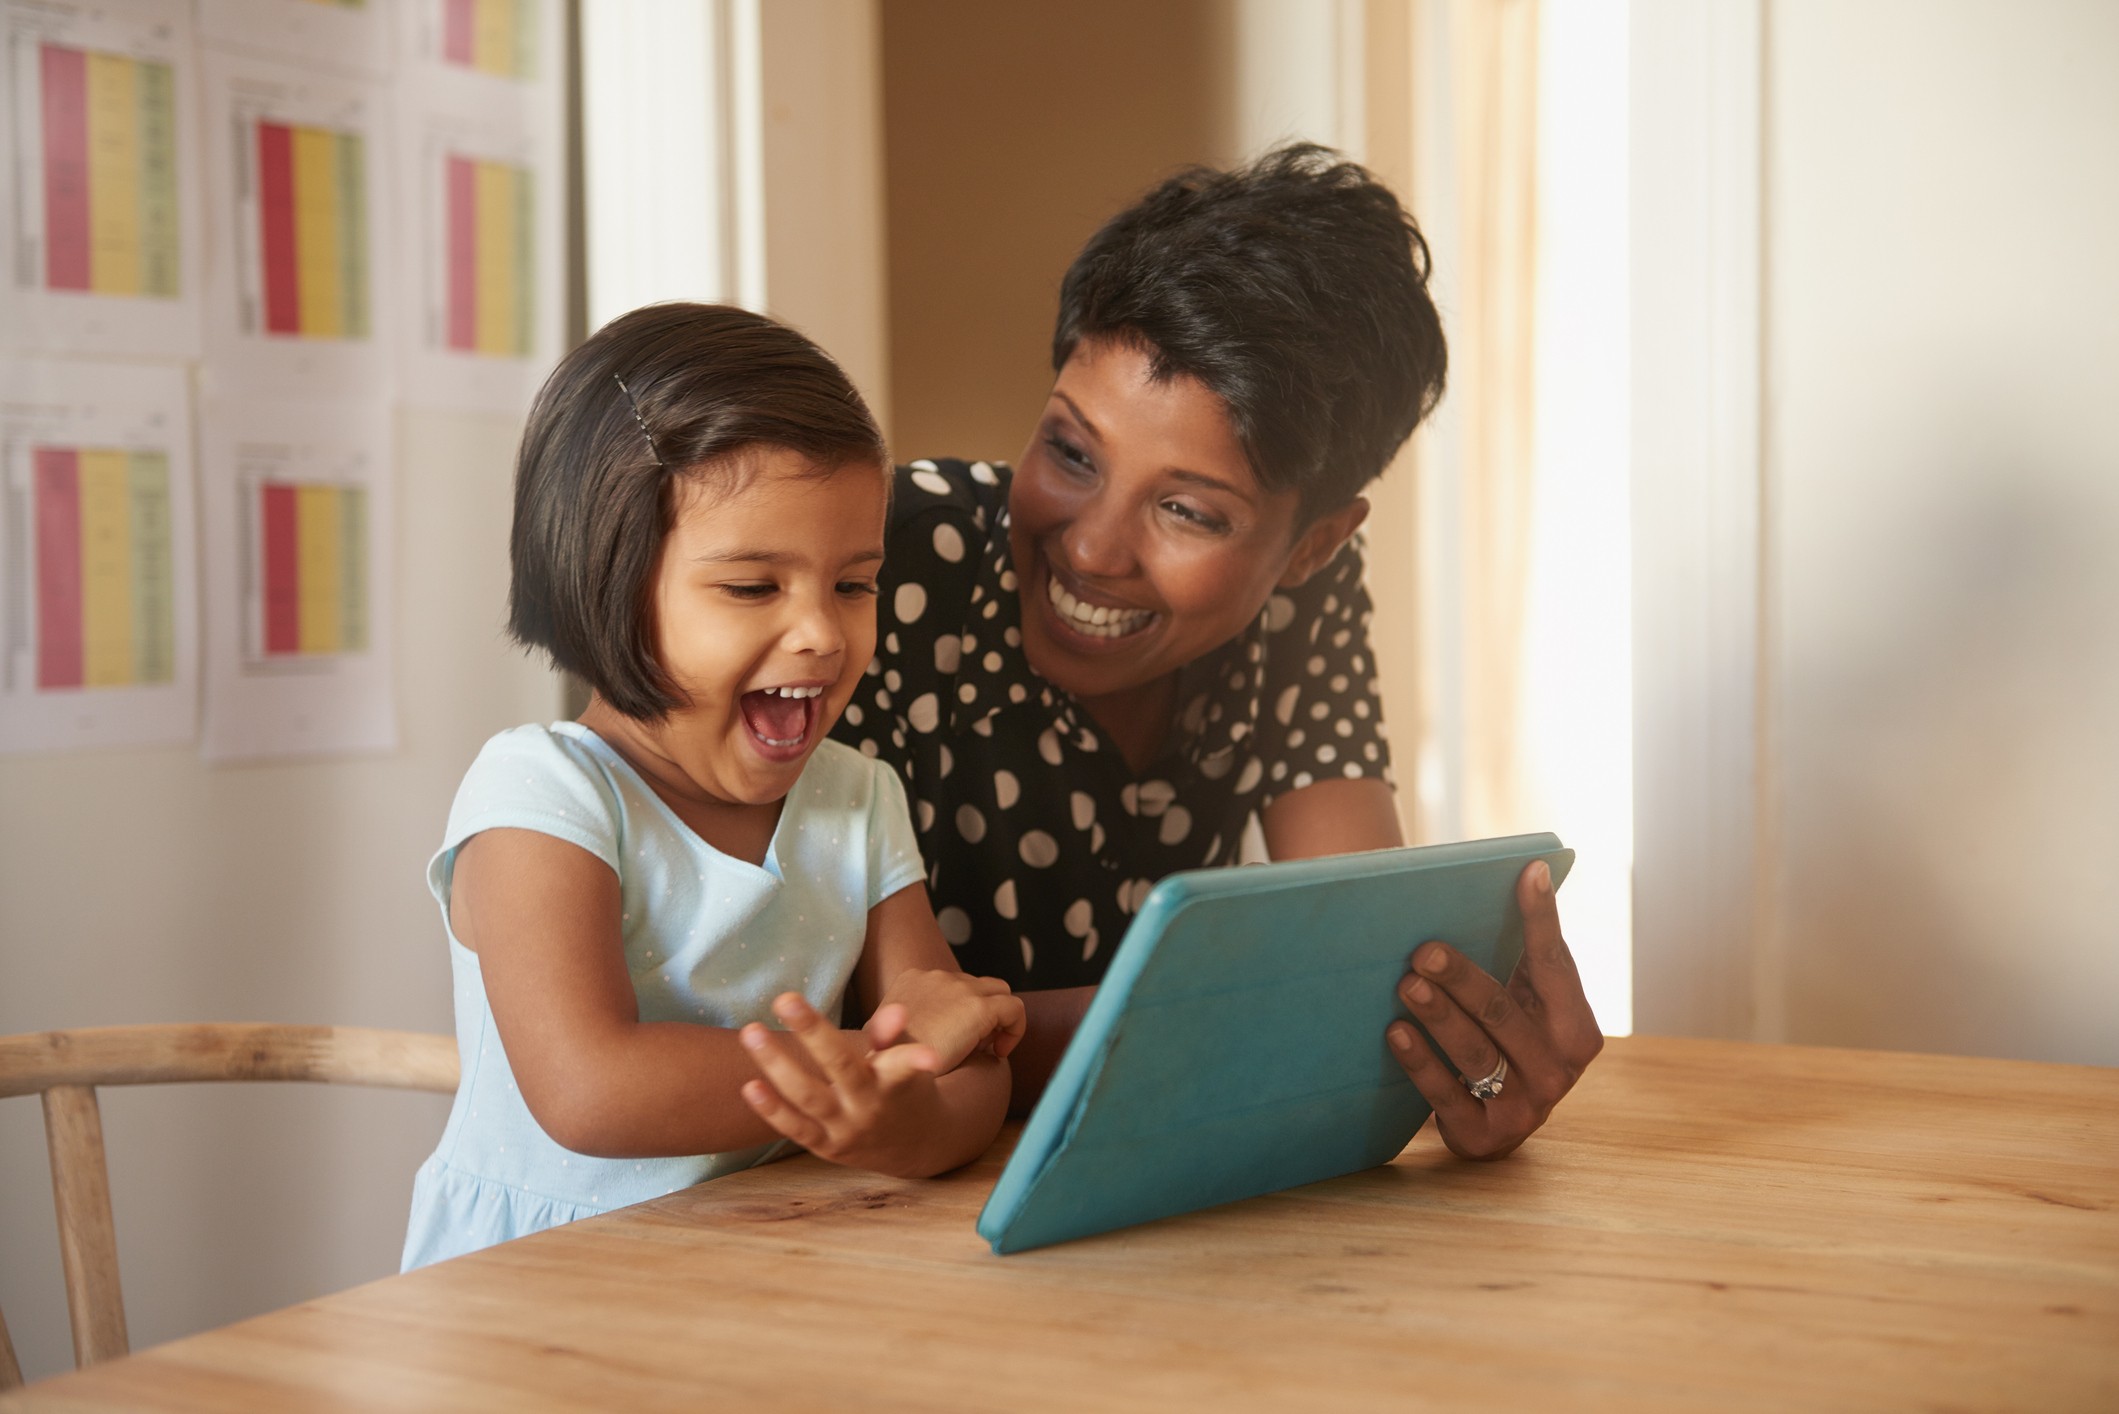 Excited child and parent on a tablet together.